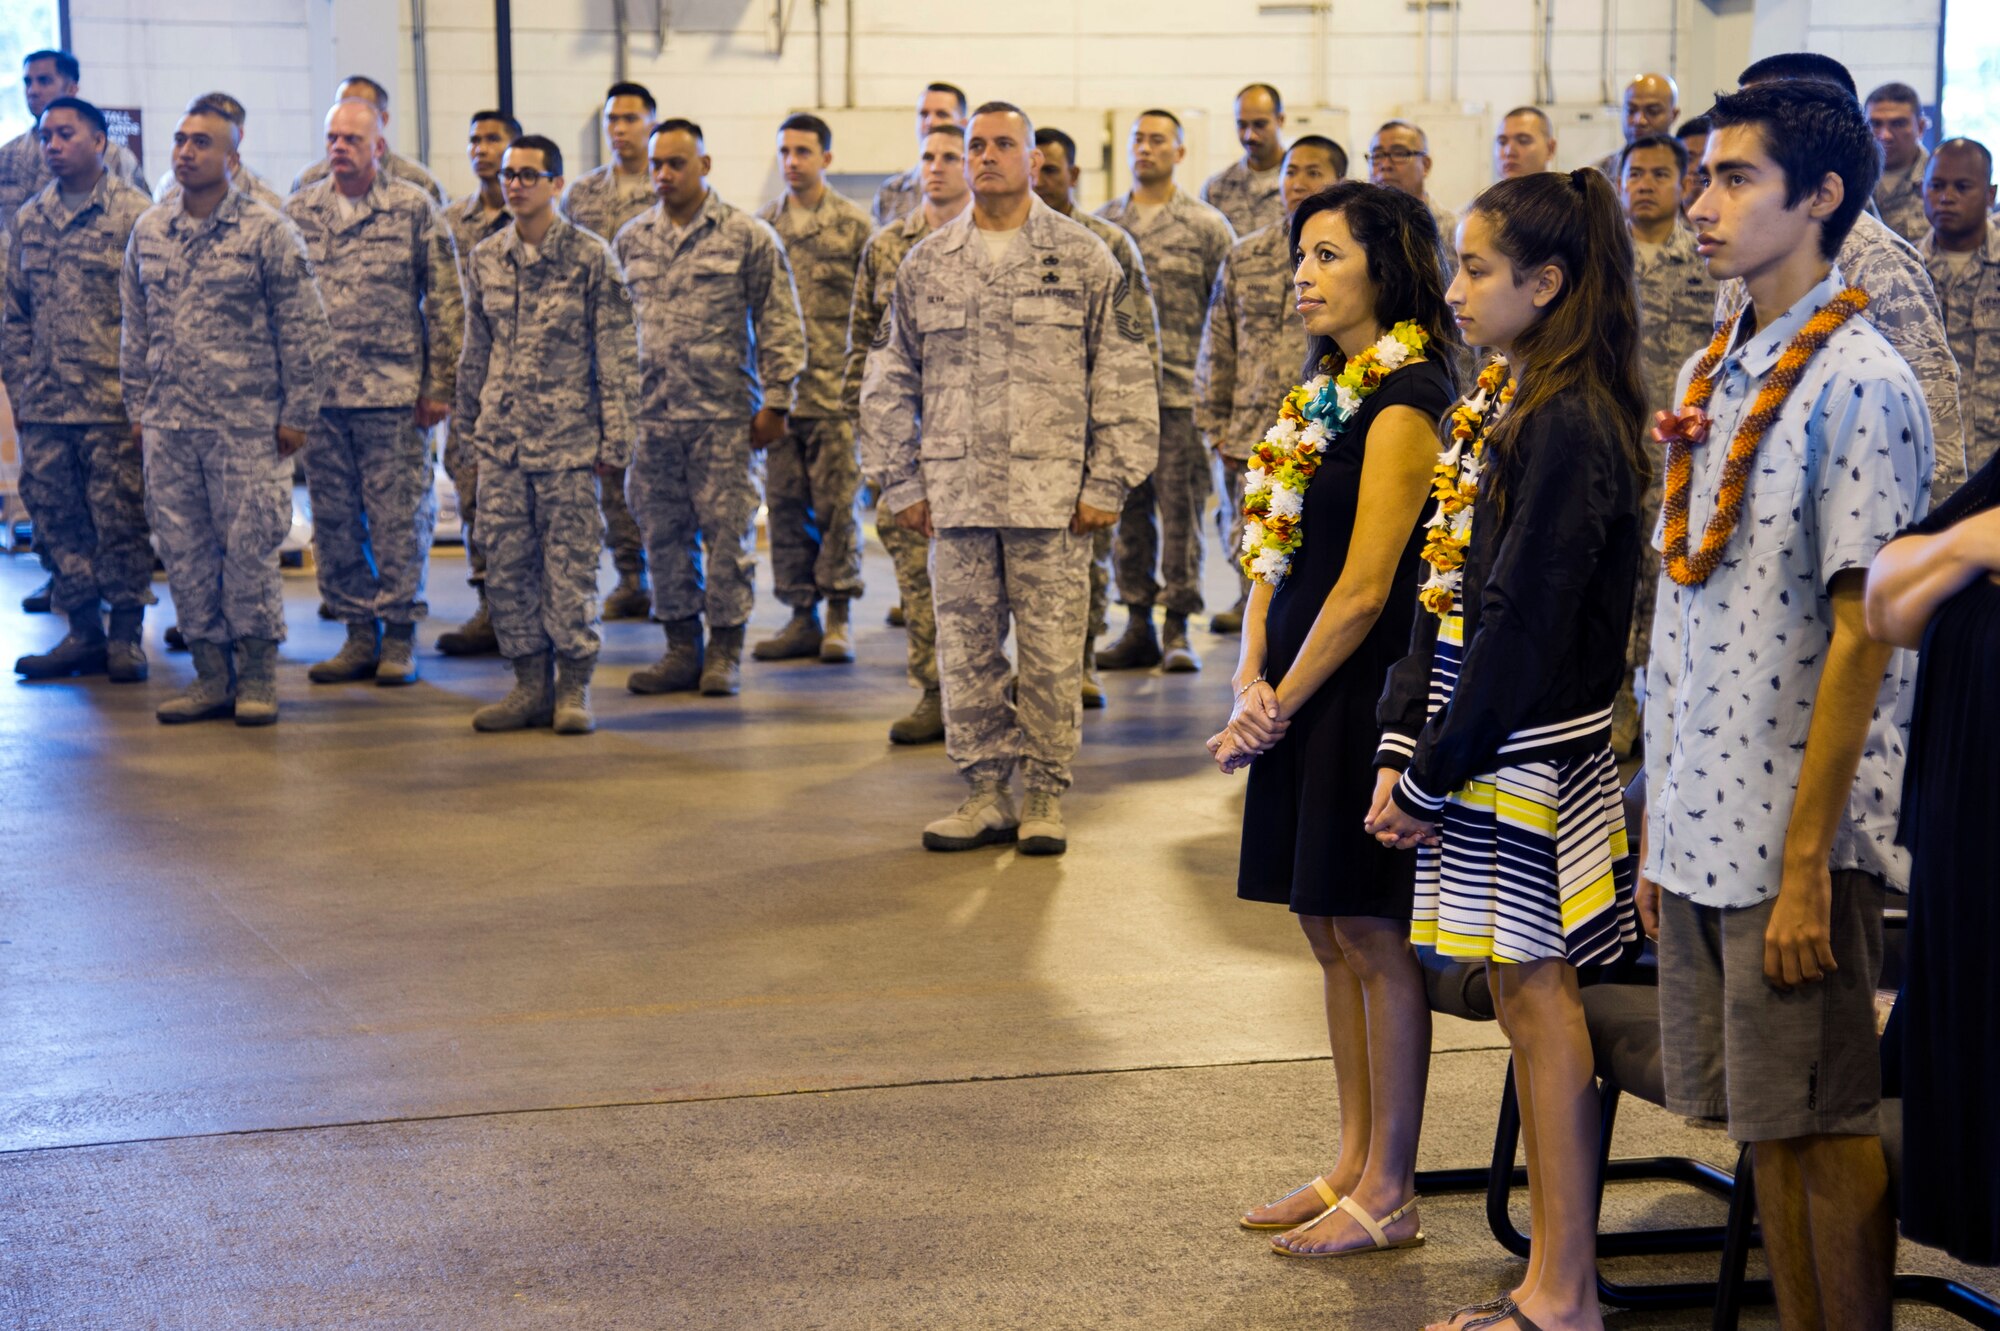 The family of U.S. Air Force Maj. Kenneth Ruggles Jr., which include his wife, Michelle Ruggles, and children, Kadyn and Davenon, attend his assumption of command for the 48th Aerial Port Squadron during a ceremony at Joint Base Pearl Harbor-Hickam, Hawaii, April 7, 2018.